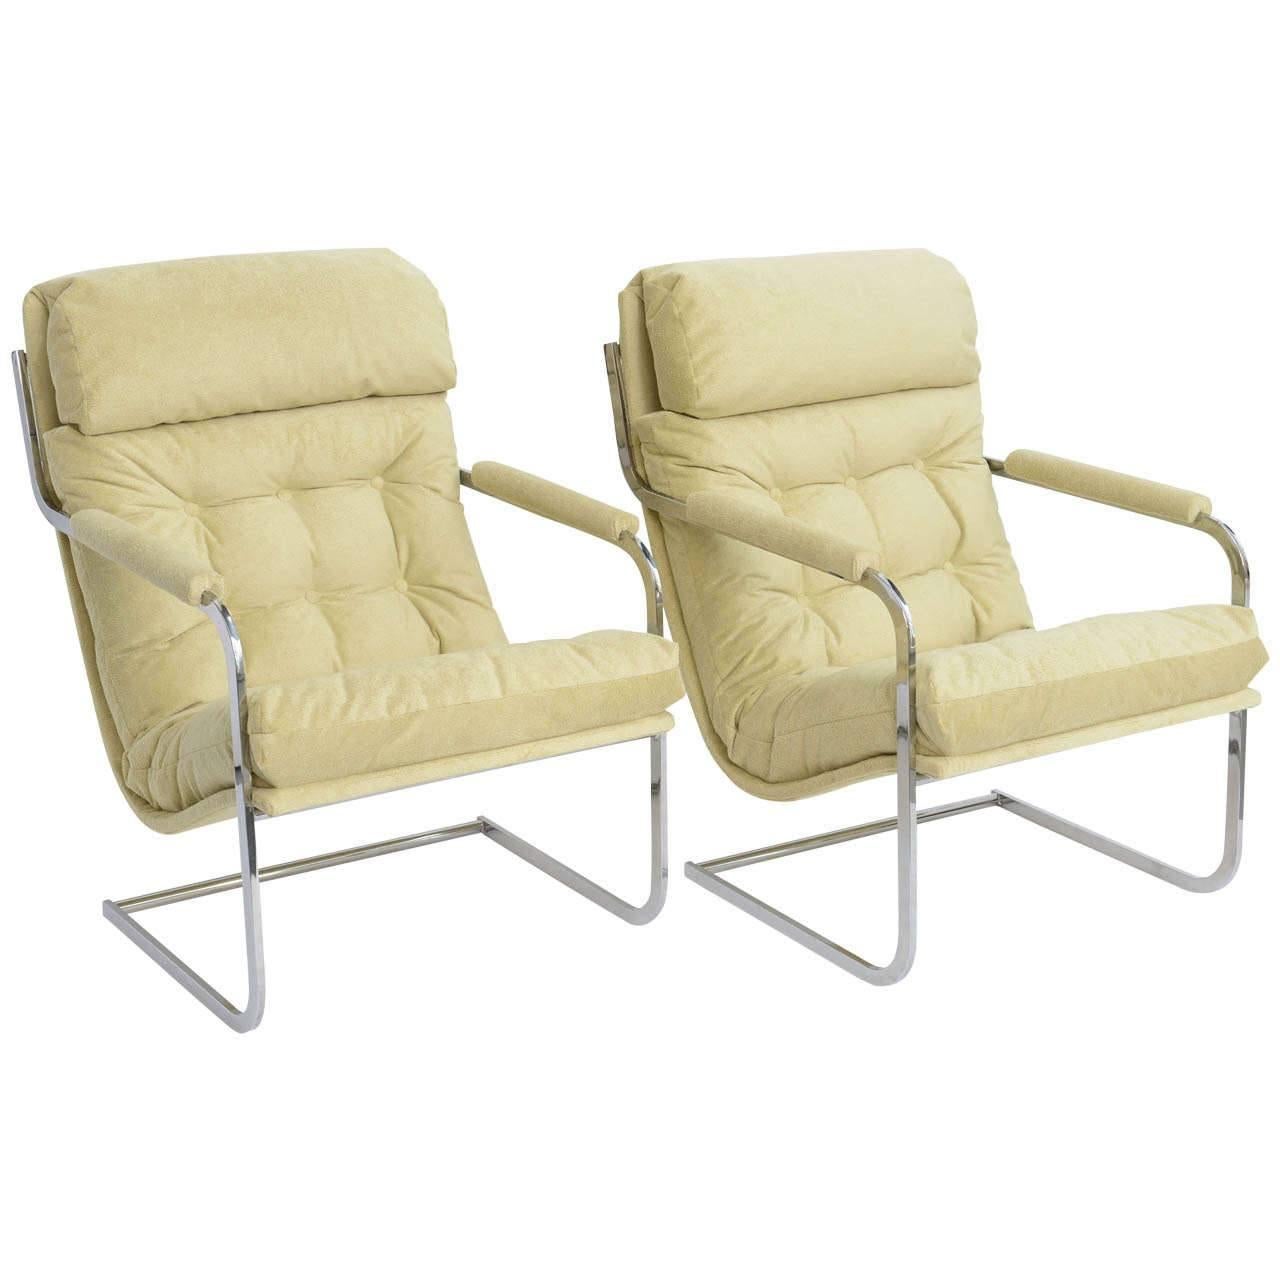 Exceptional Milo Baughman Style Cantilever Lounge Chairs